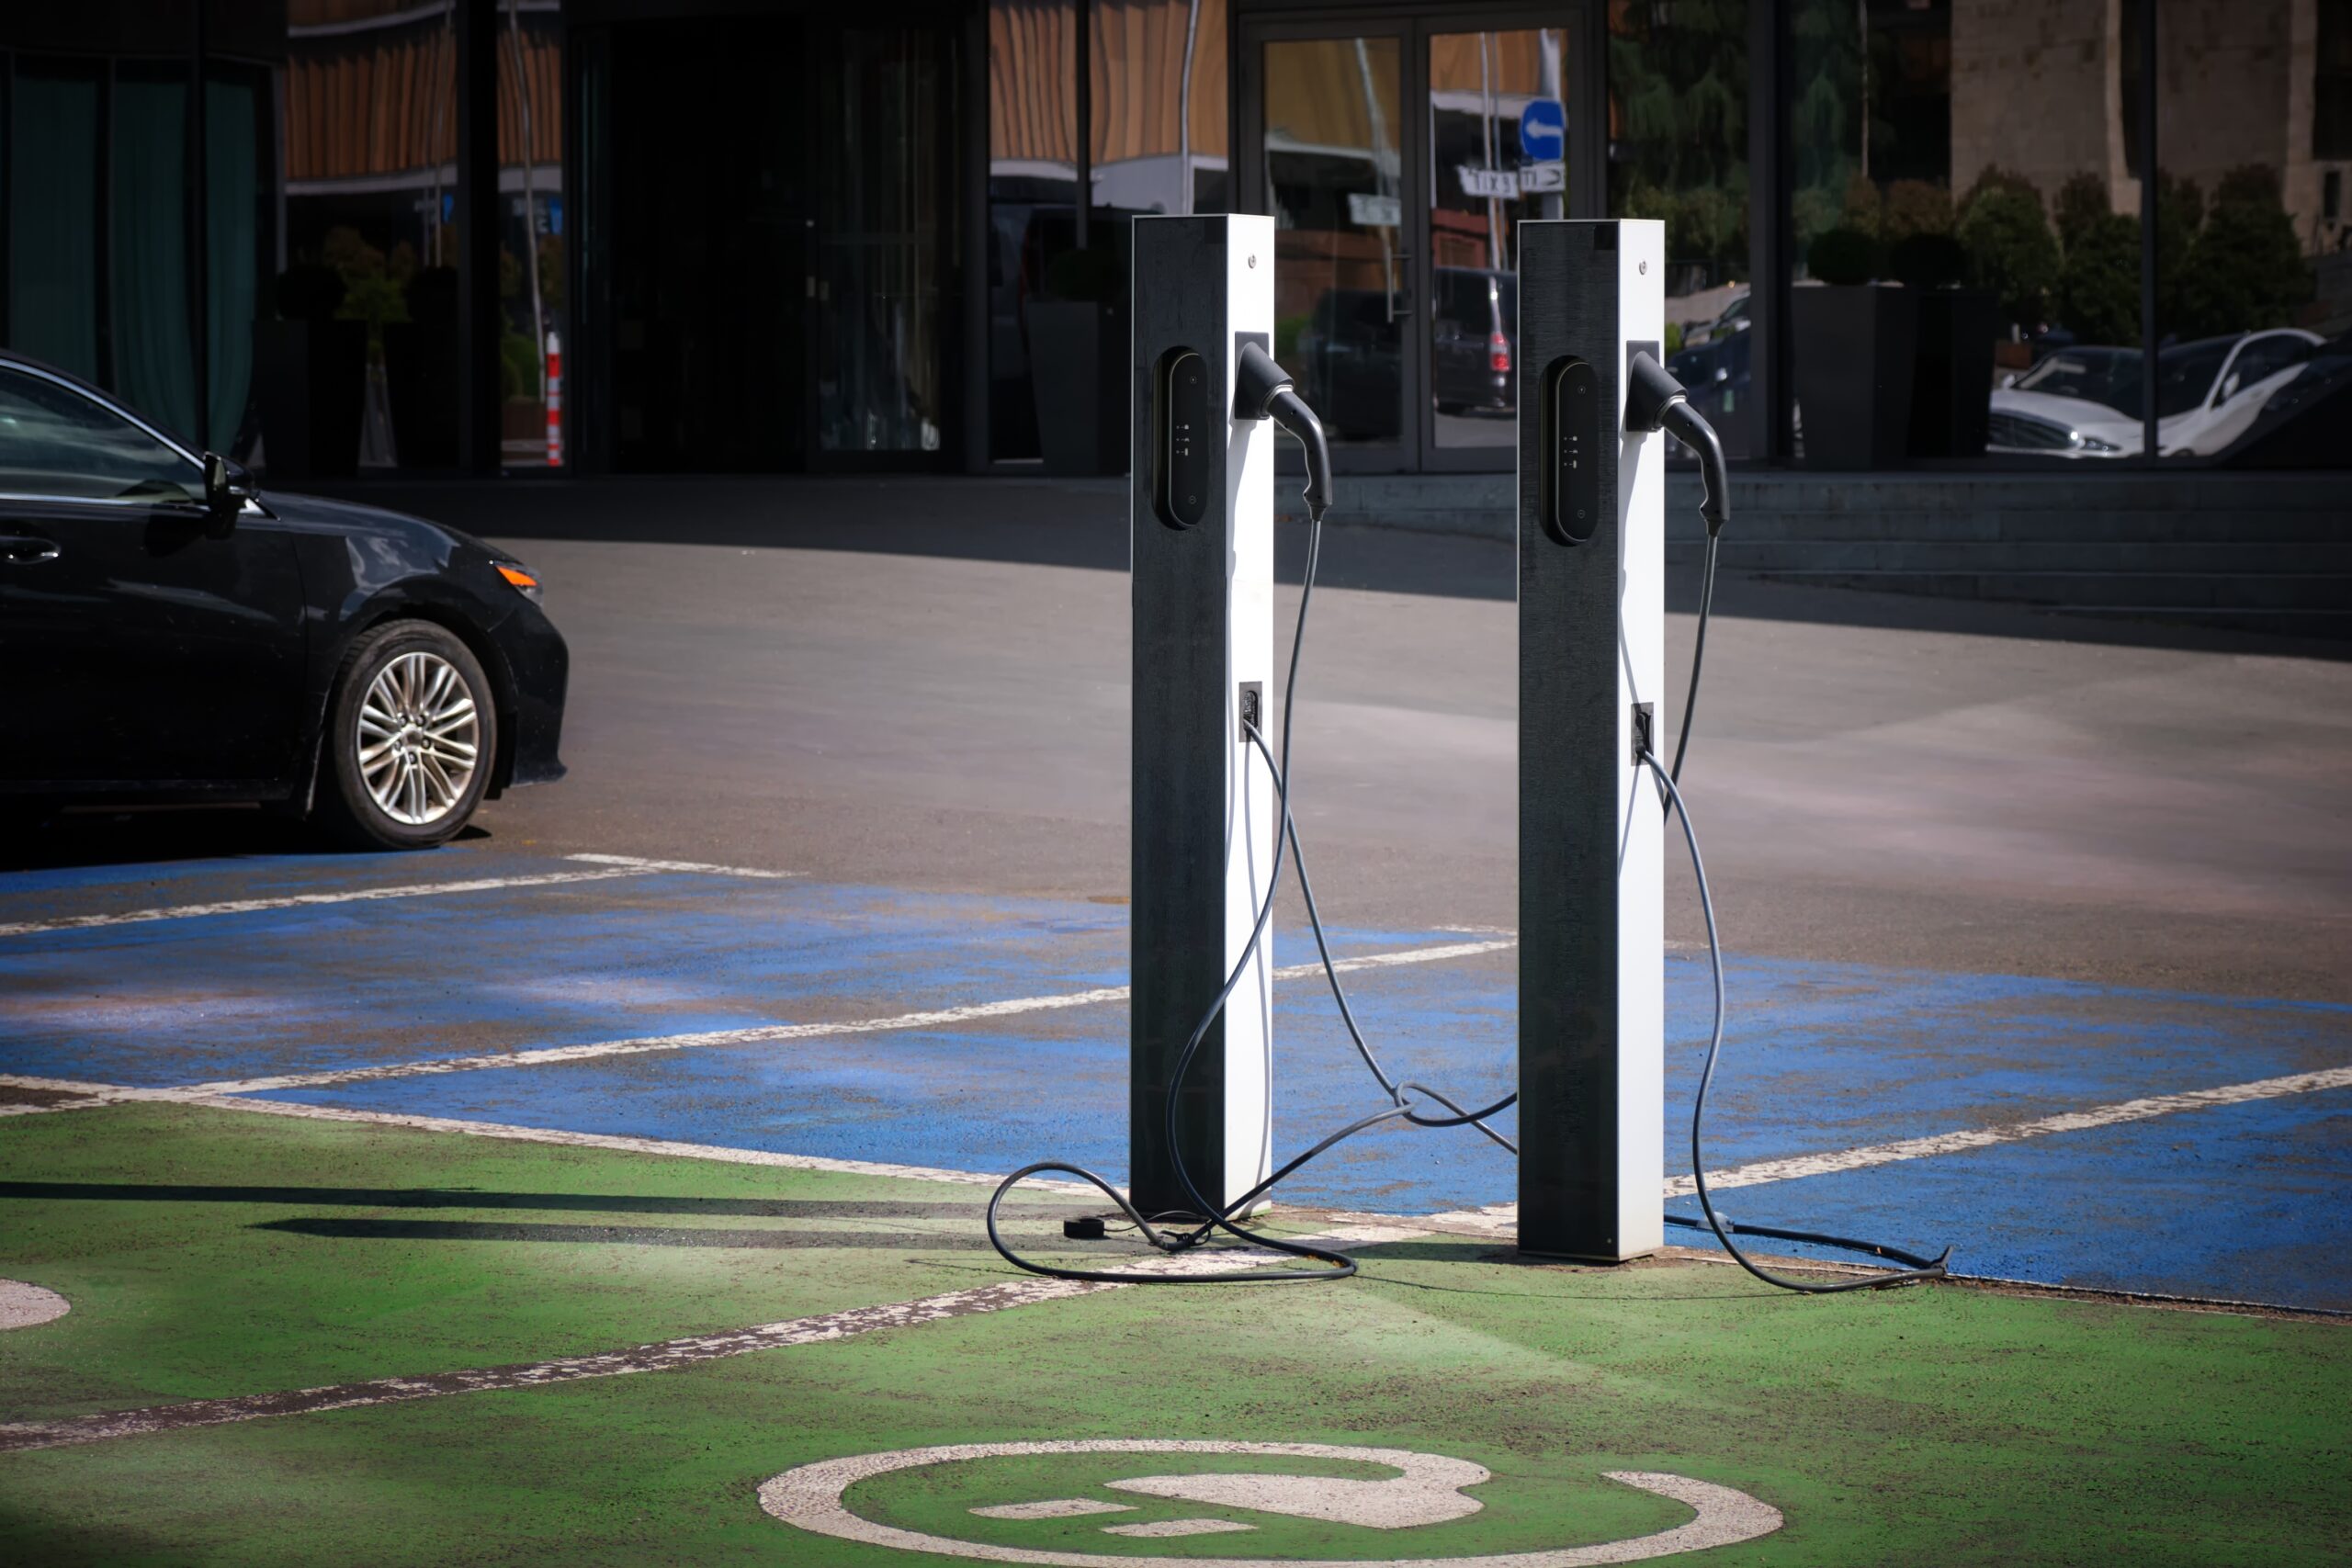 48 percent of EV drivers would not stay at a hotel without onsite EV charging